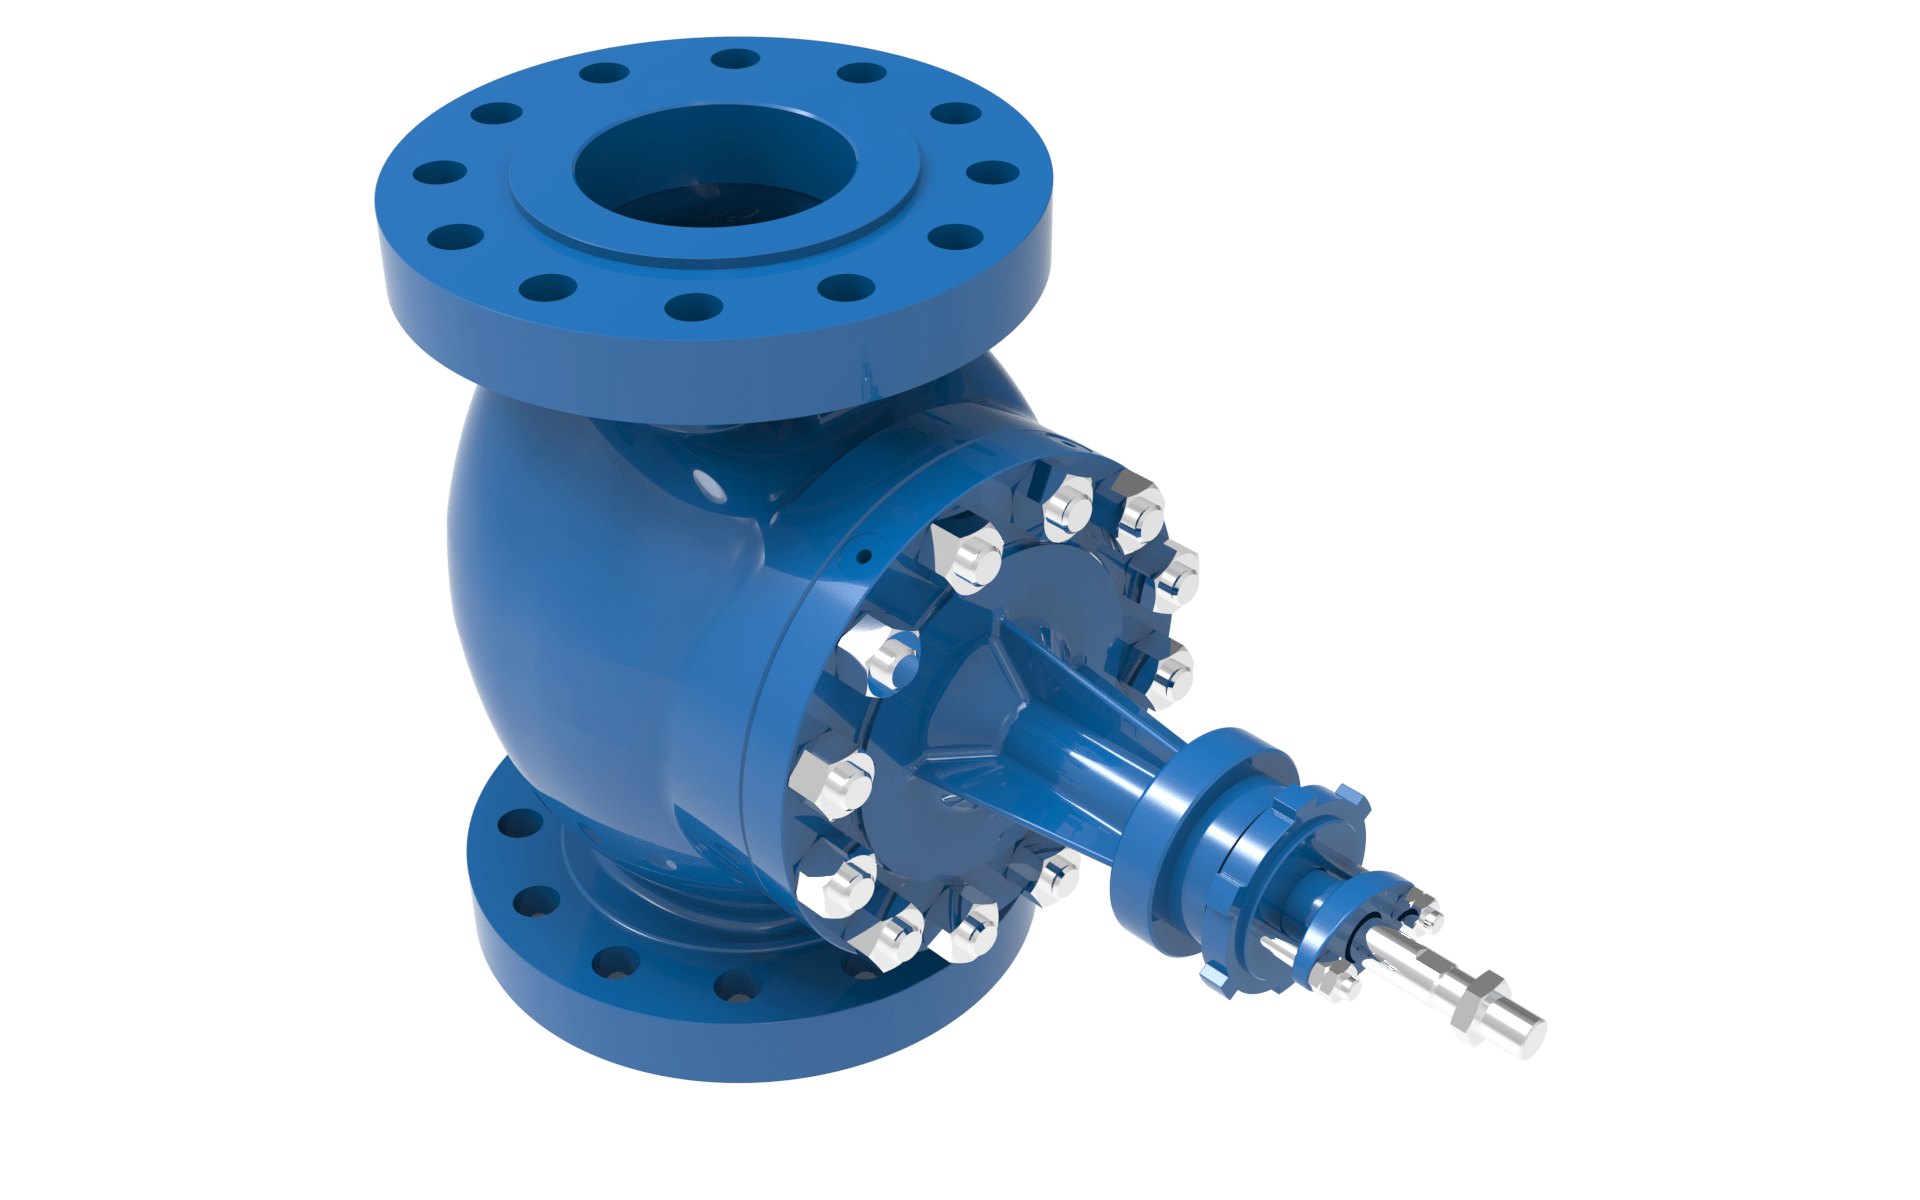 BLAKEBOROUGH® BV500 CAGE TRIM VALVES UP TO CLASS 600LB RATING right angled view